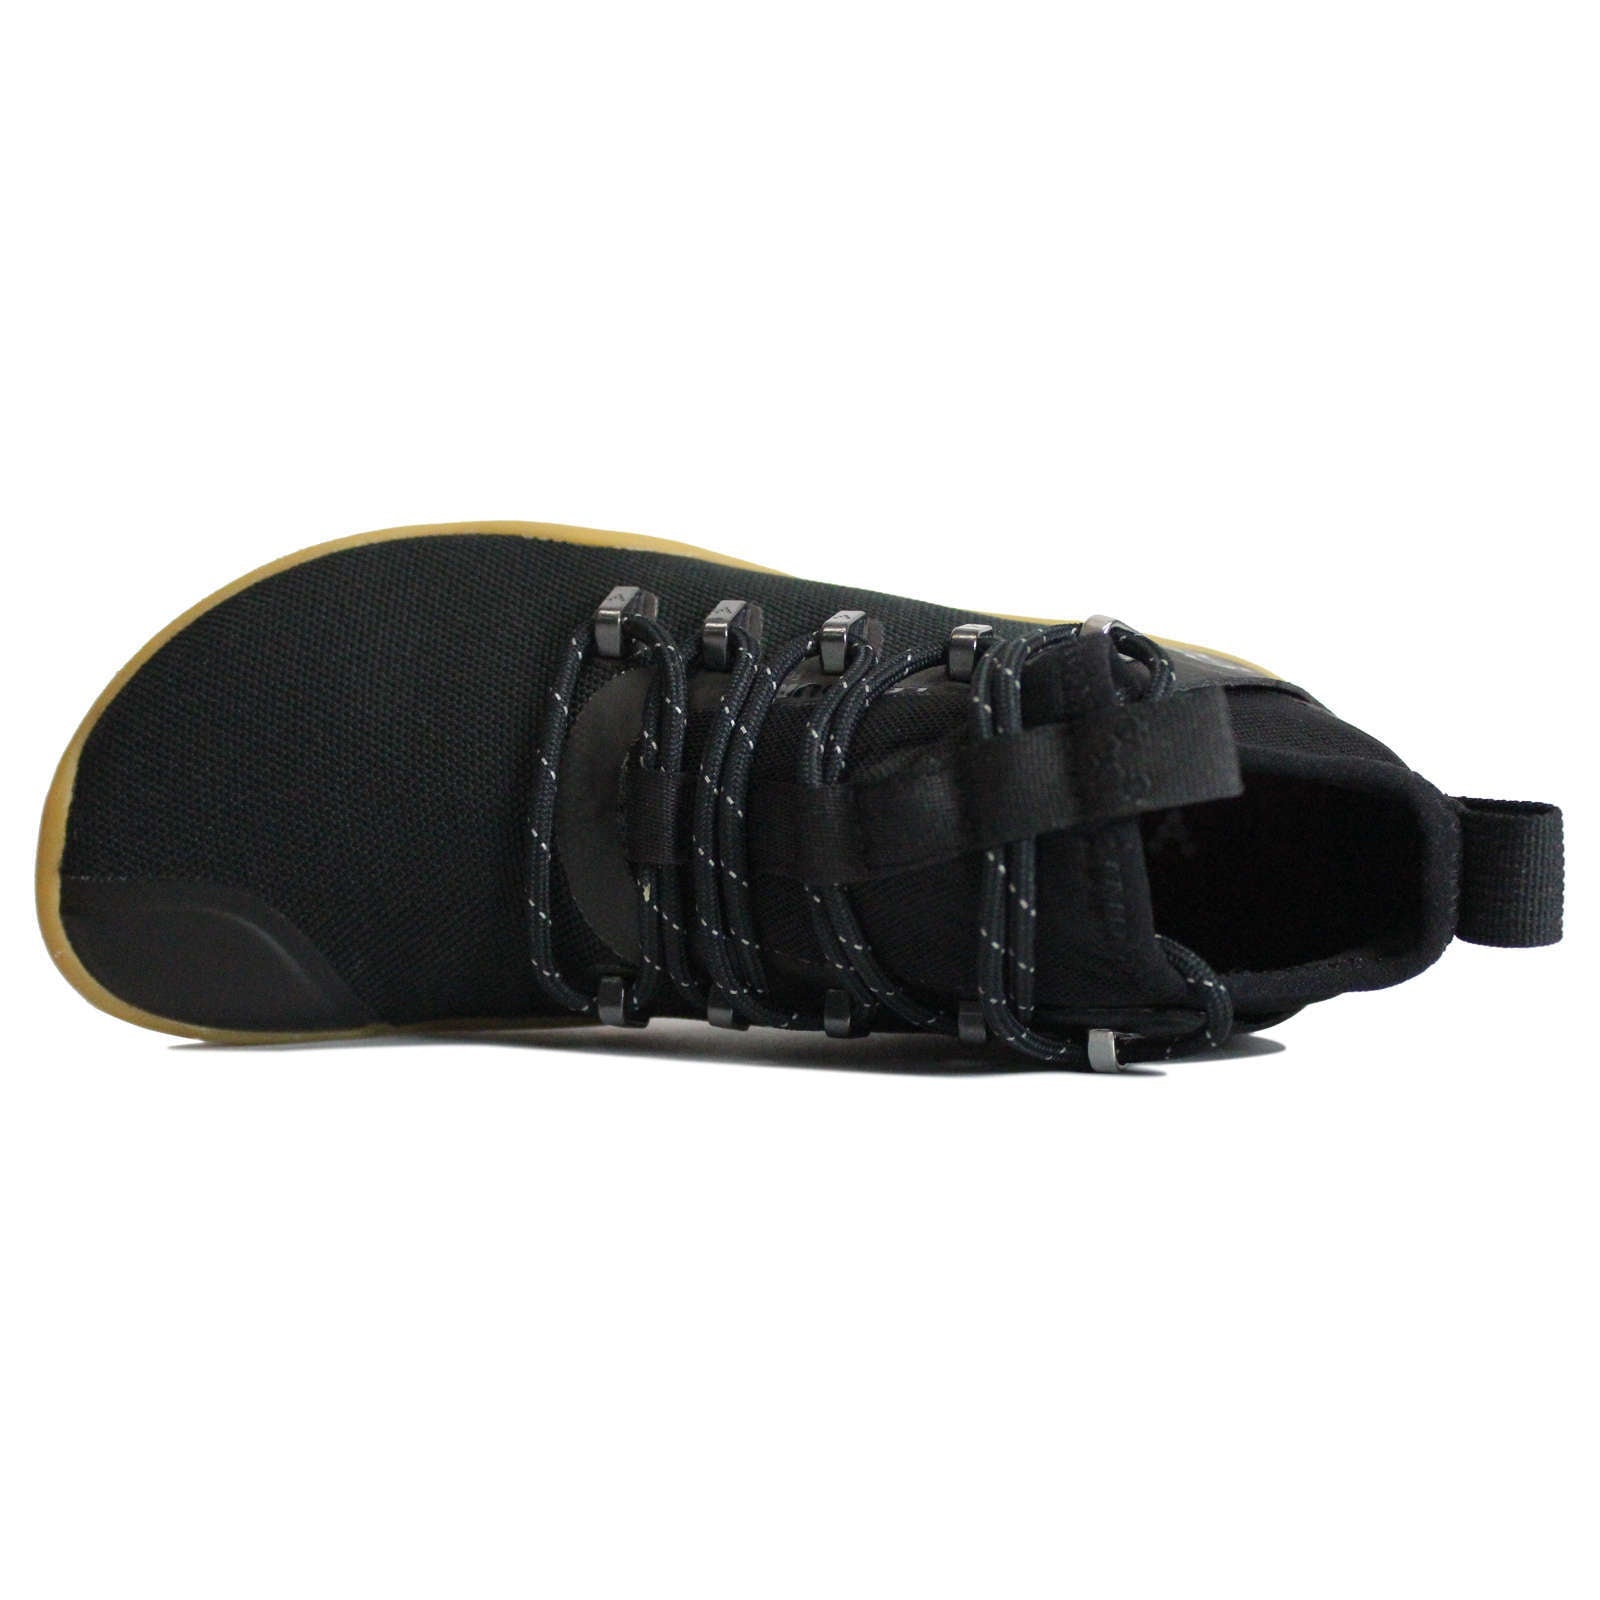 Vivobarefoot Magna Trail FG Textile Synthetic Womens Sneakers#color_black gum